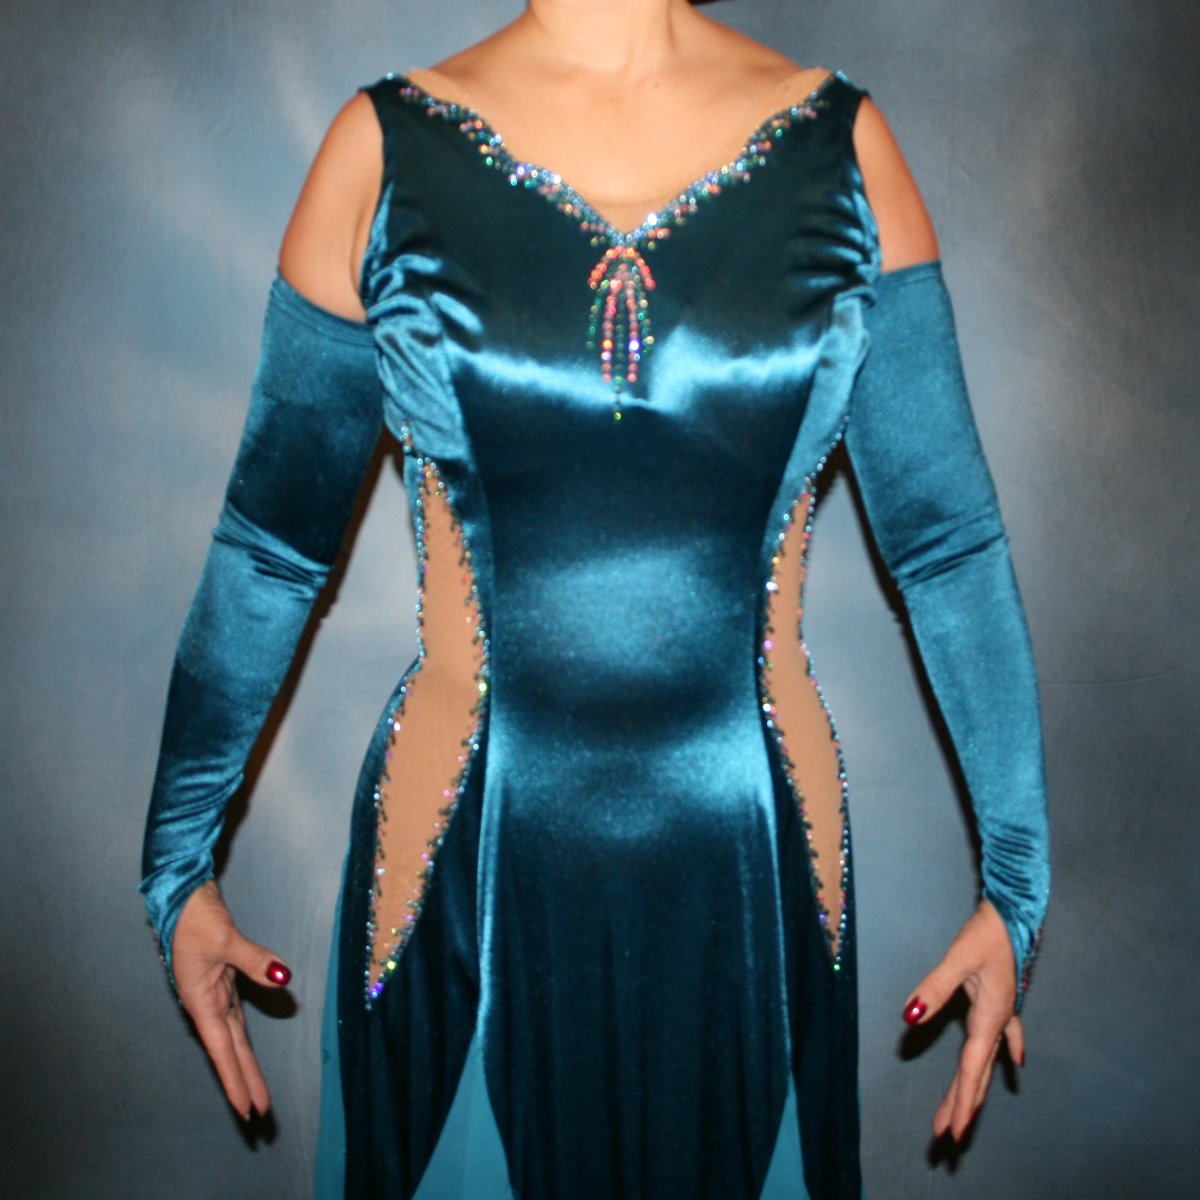 Crystal's Creations close up view of Blue ballroom dance dress was created in luxurious deep sea blue stretch satin with deep sea blue crepe chiffon embroidered insets, organza flounces…nude illusion cutout detailing…embellished with CAB & blue zircon Ab Swarovski stonework.